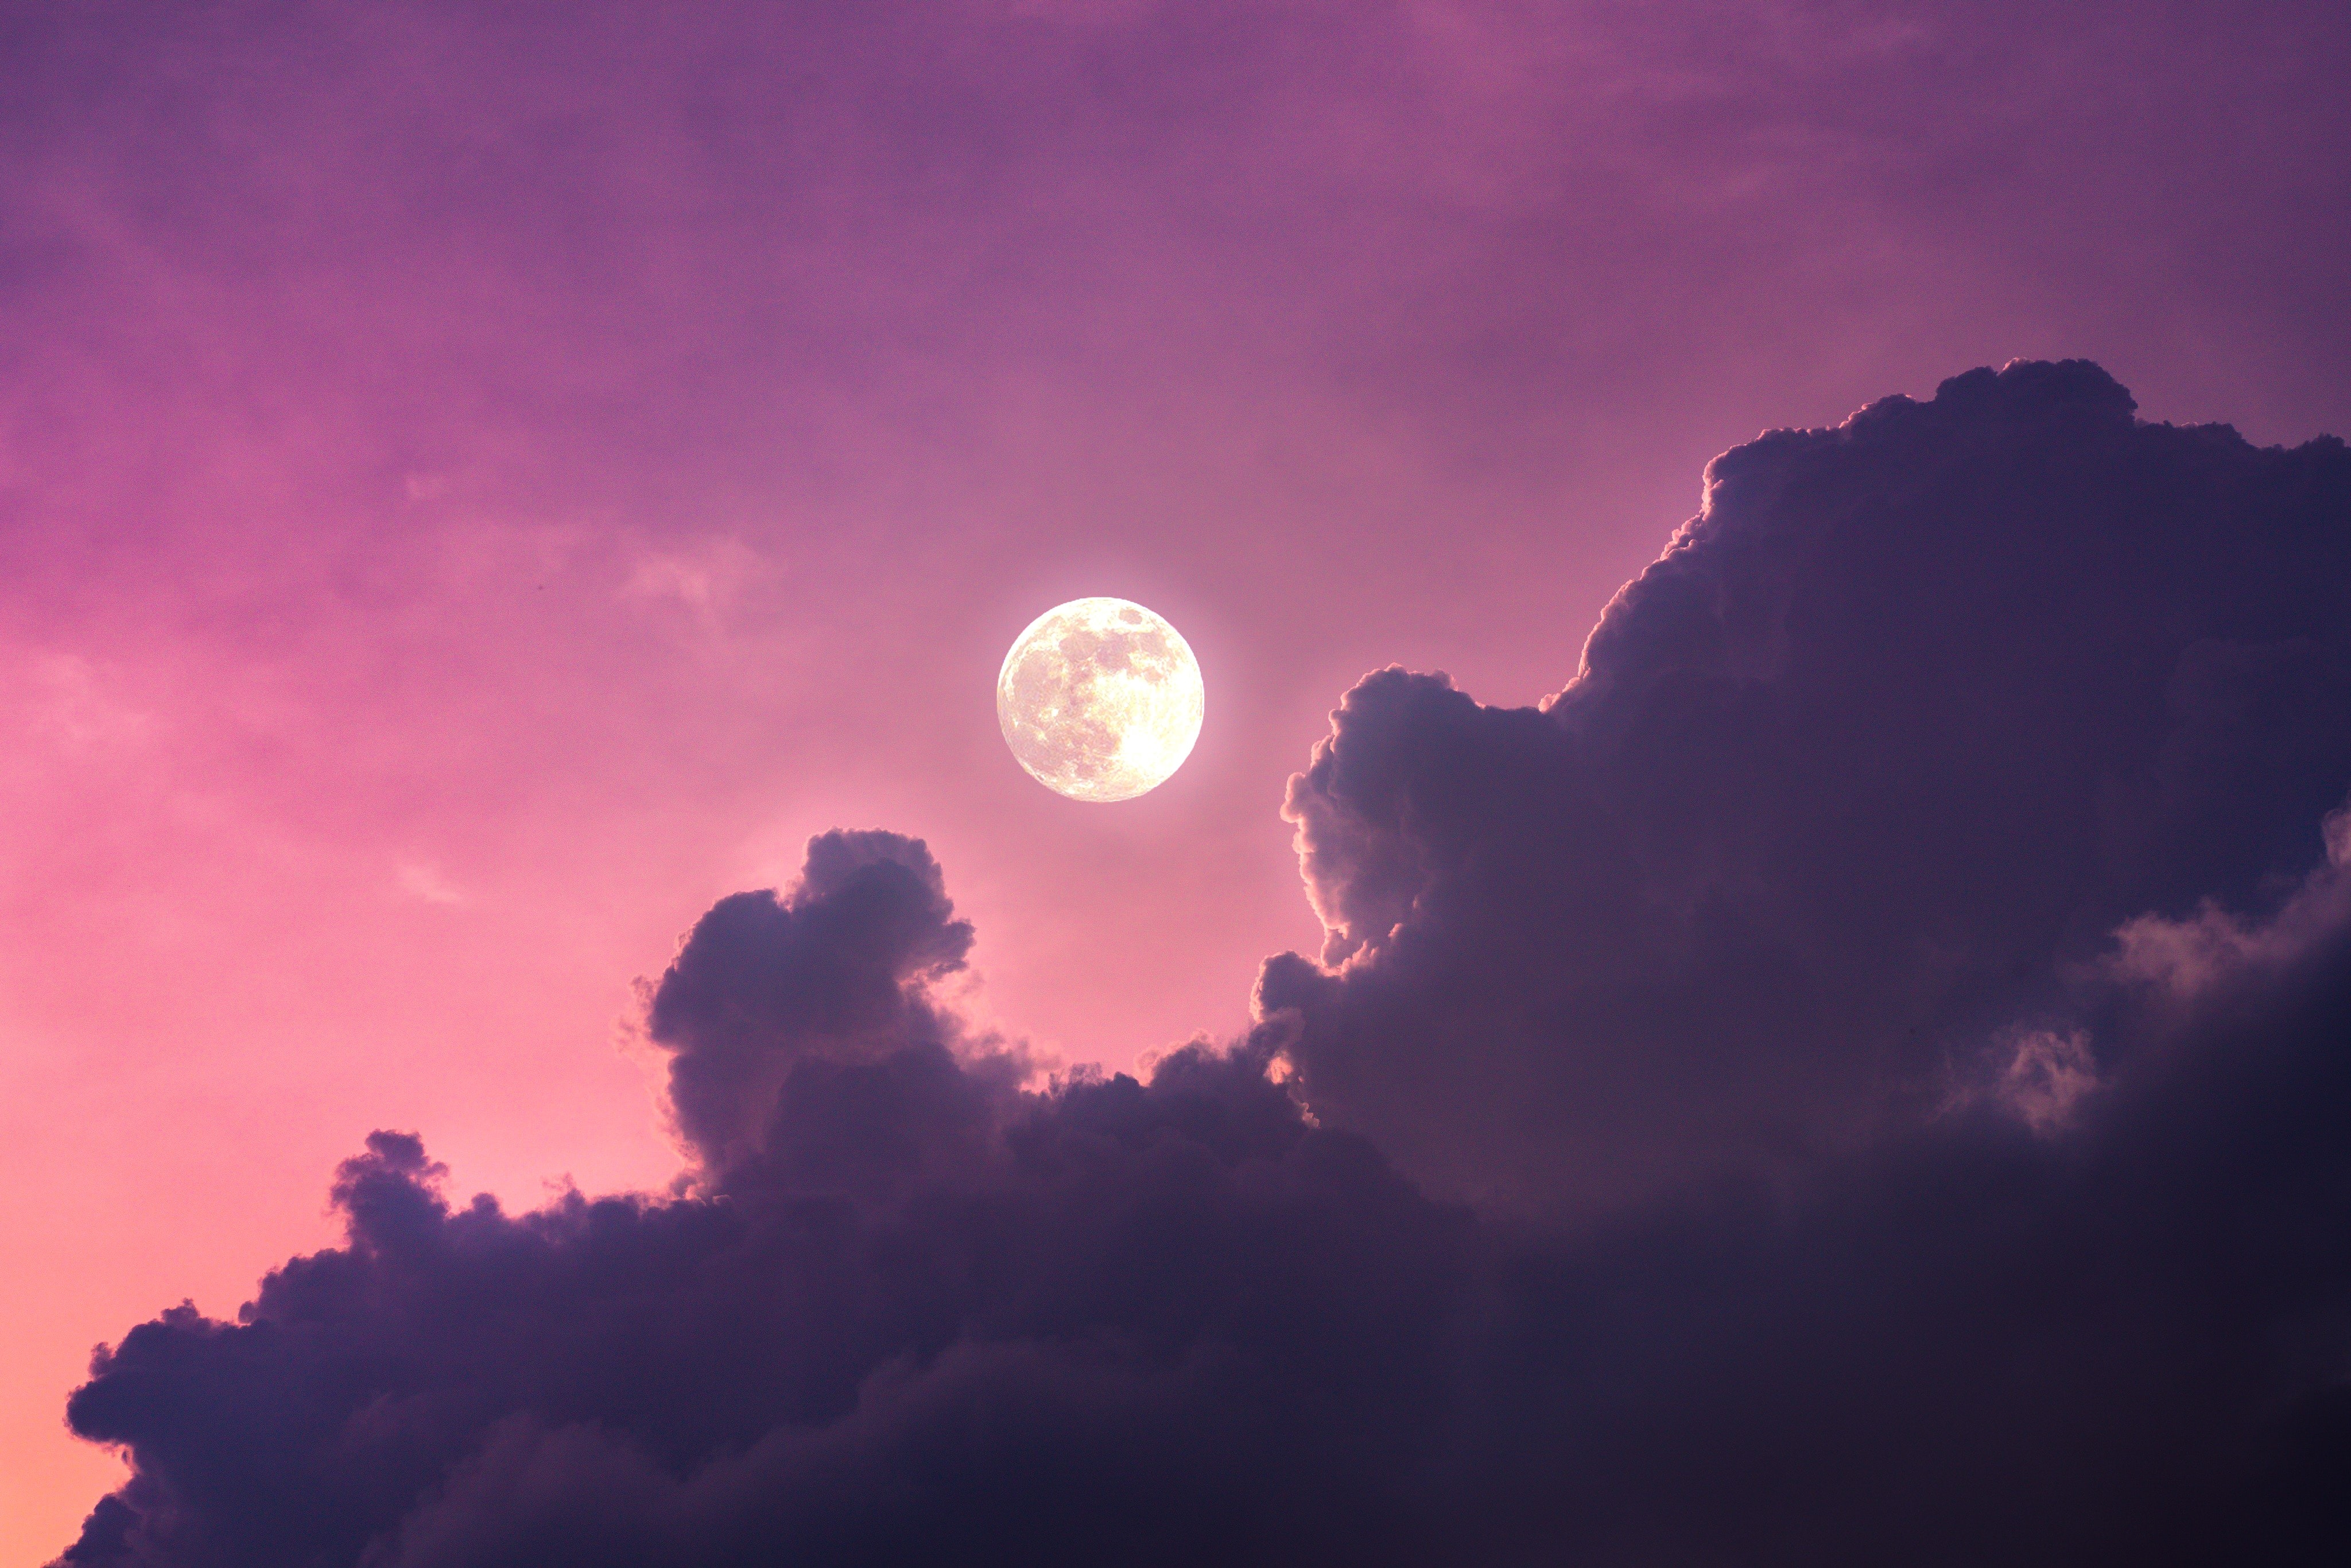 HD wallpaper, Clouds, Scenic, Pink Sky, Aesthetic, Full Moon